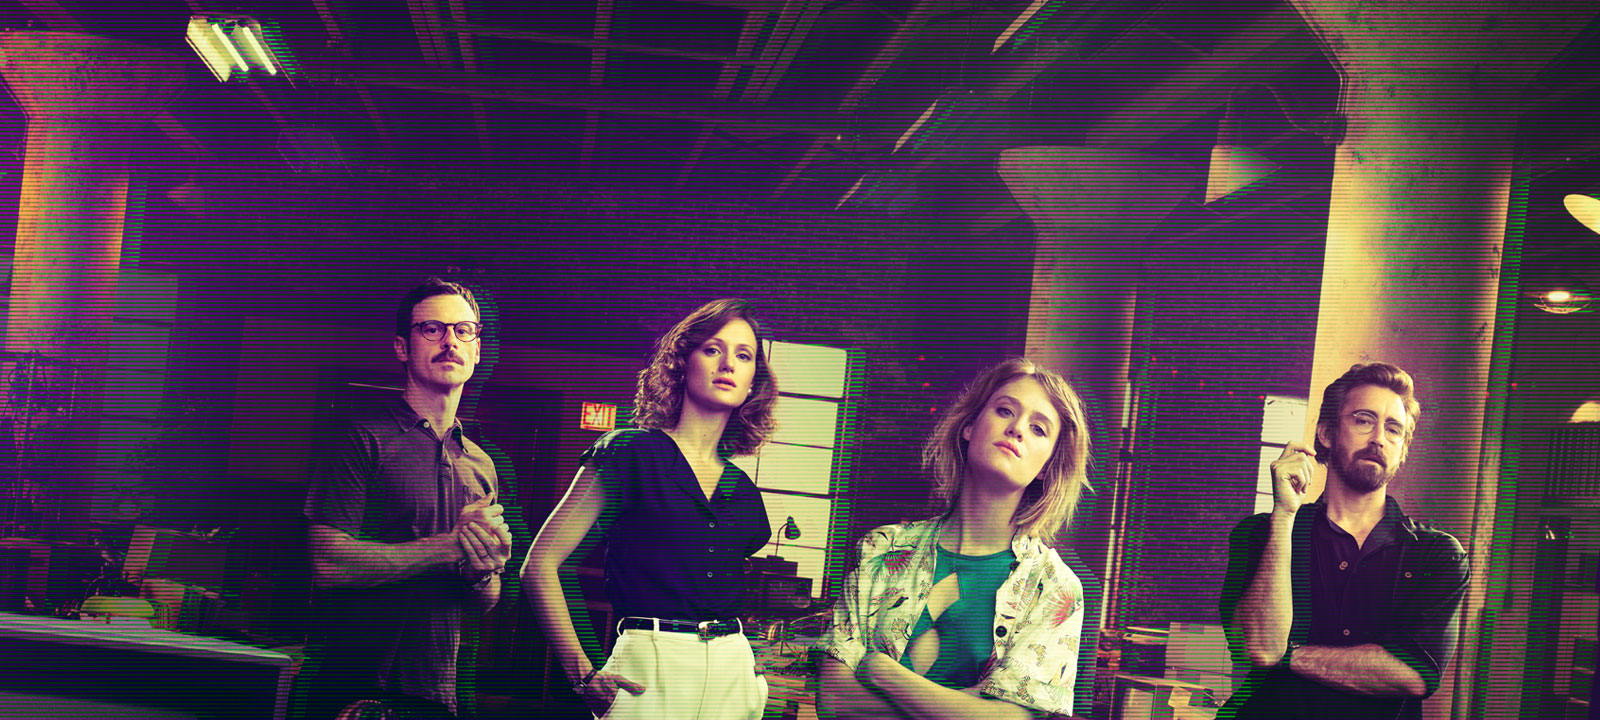 HQ Halt And Catch Fire Wallpapers | File 358.83Kb